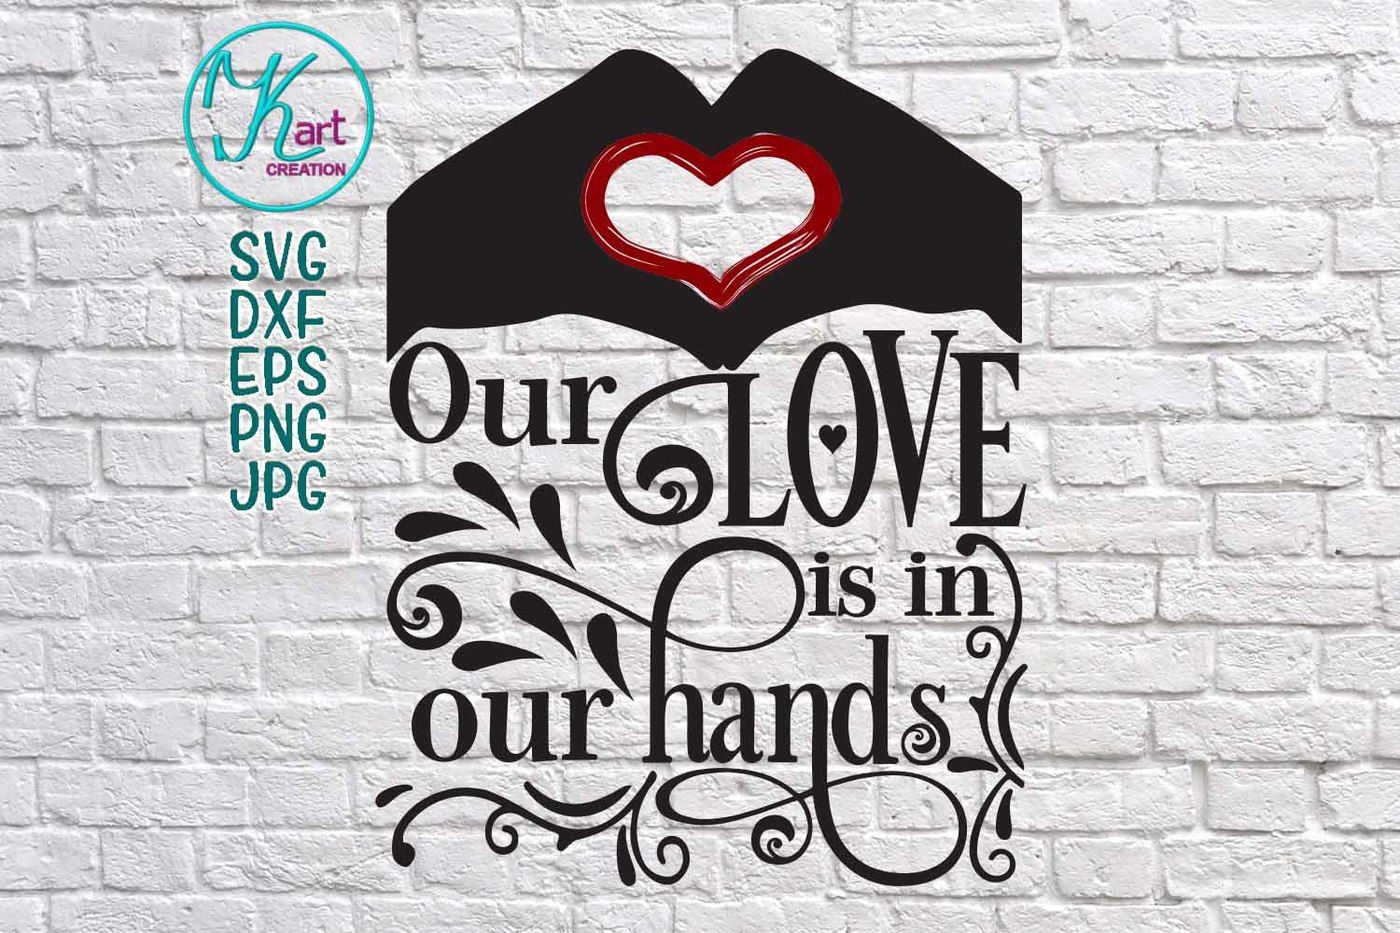 Download Love Svg Valentine Svg Valentines Day Svg Love Is In Our Hands Svg Love Saying Love Quote Svg Couple Saying Christian Svg Faith Svg By Kartcreation Thehungryjpeg Com